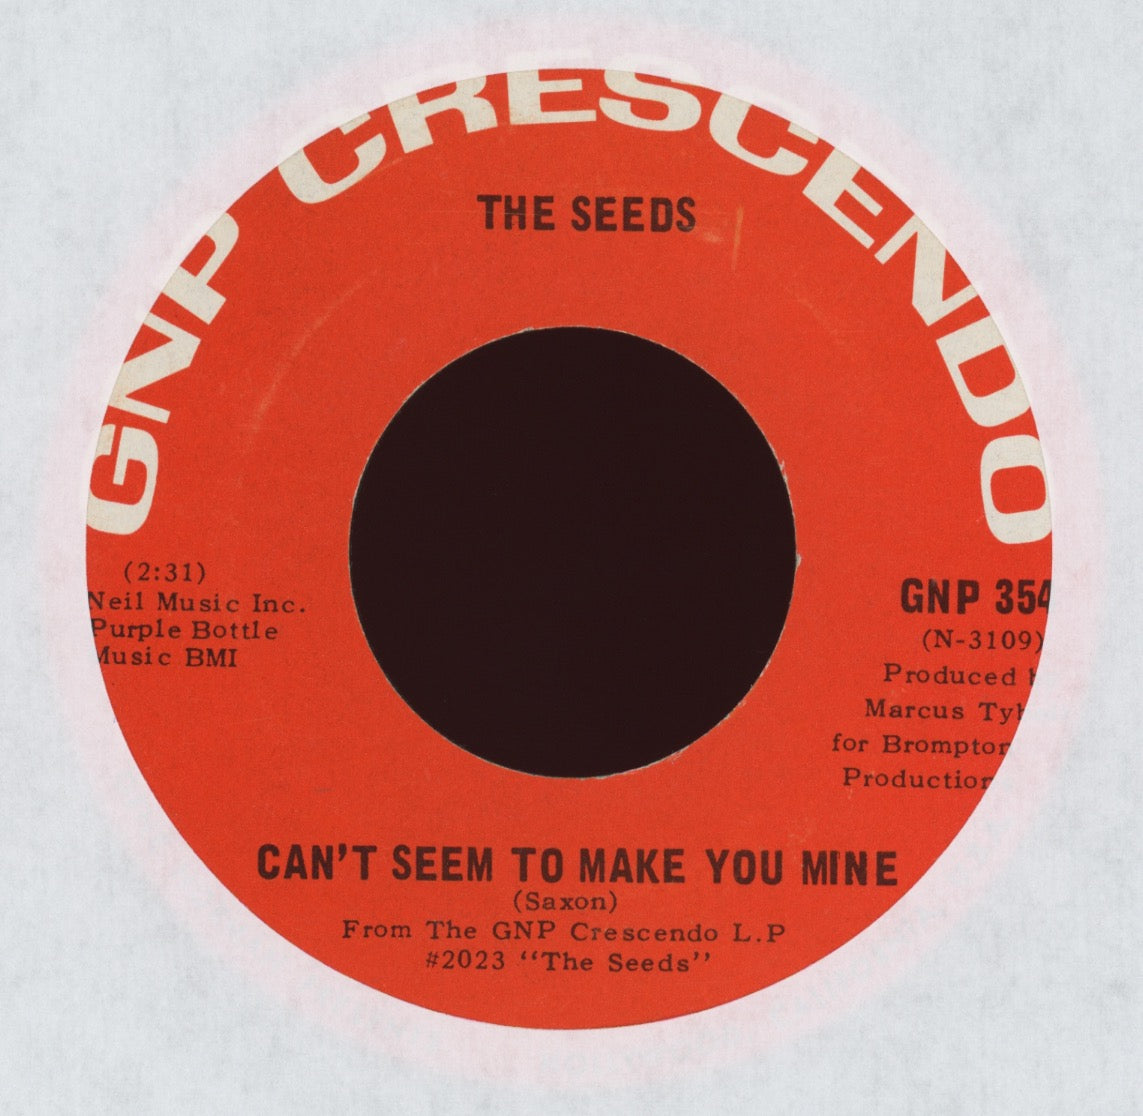 The Seeds - Can't Seem To Make You Mine on GNP Crescendo